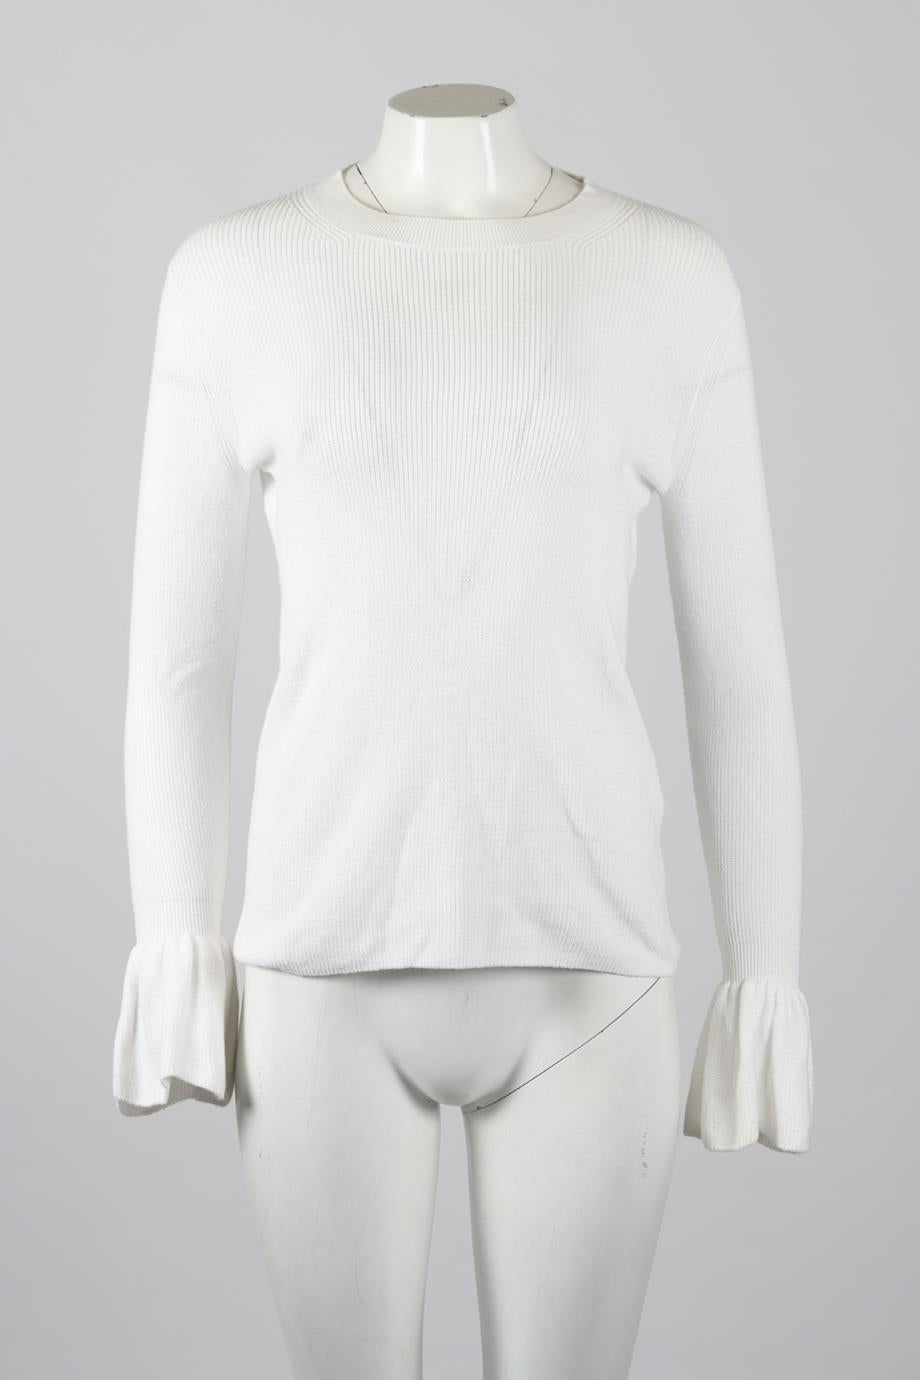 SEE BY CHLOÉ RIBBED COTTON SWEATER XSMALL